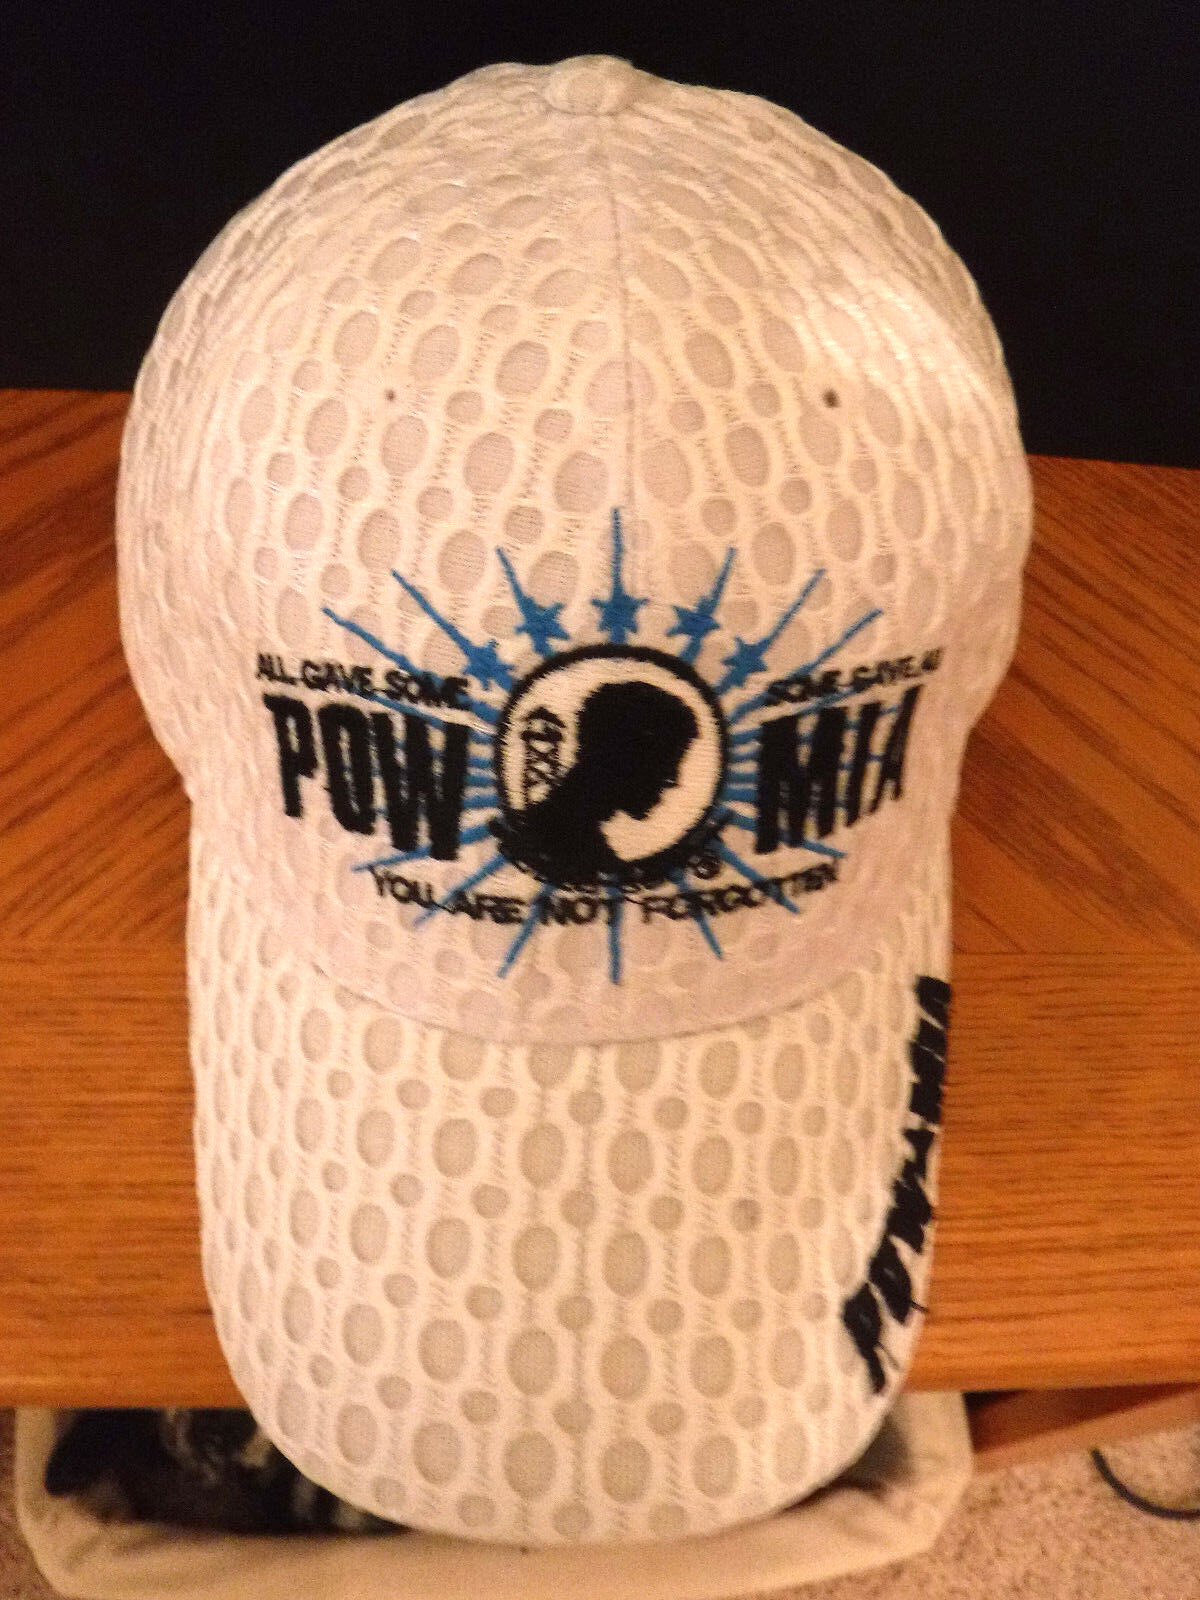 POW-MIA Ball Cap, White with Black Letters,  From Massive collection.